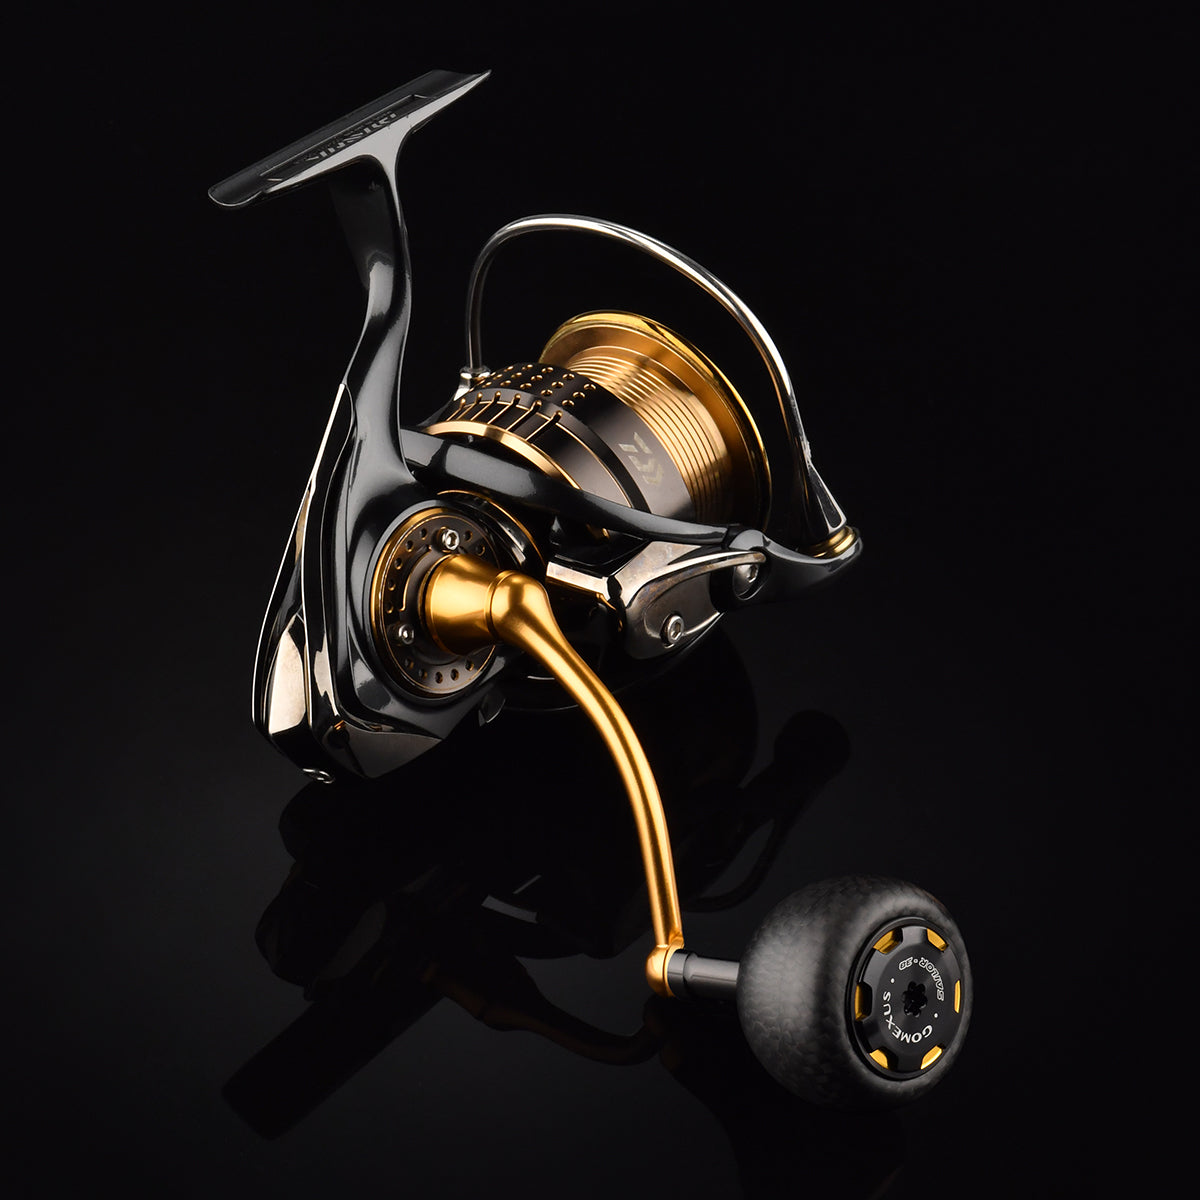 How To Service Reel Handles on Fishing Reels